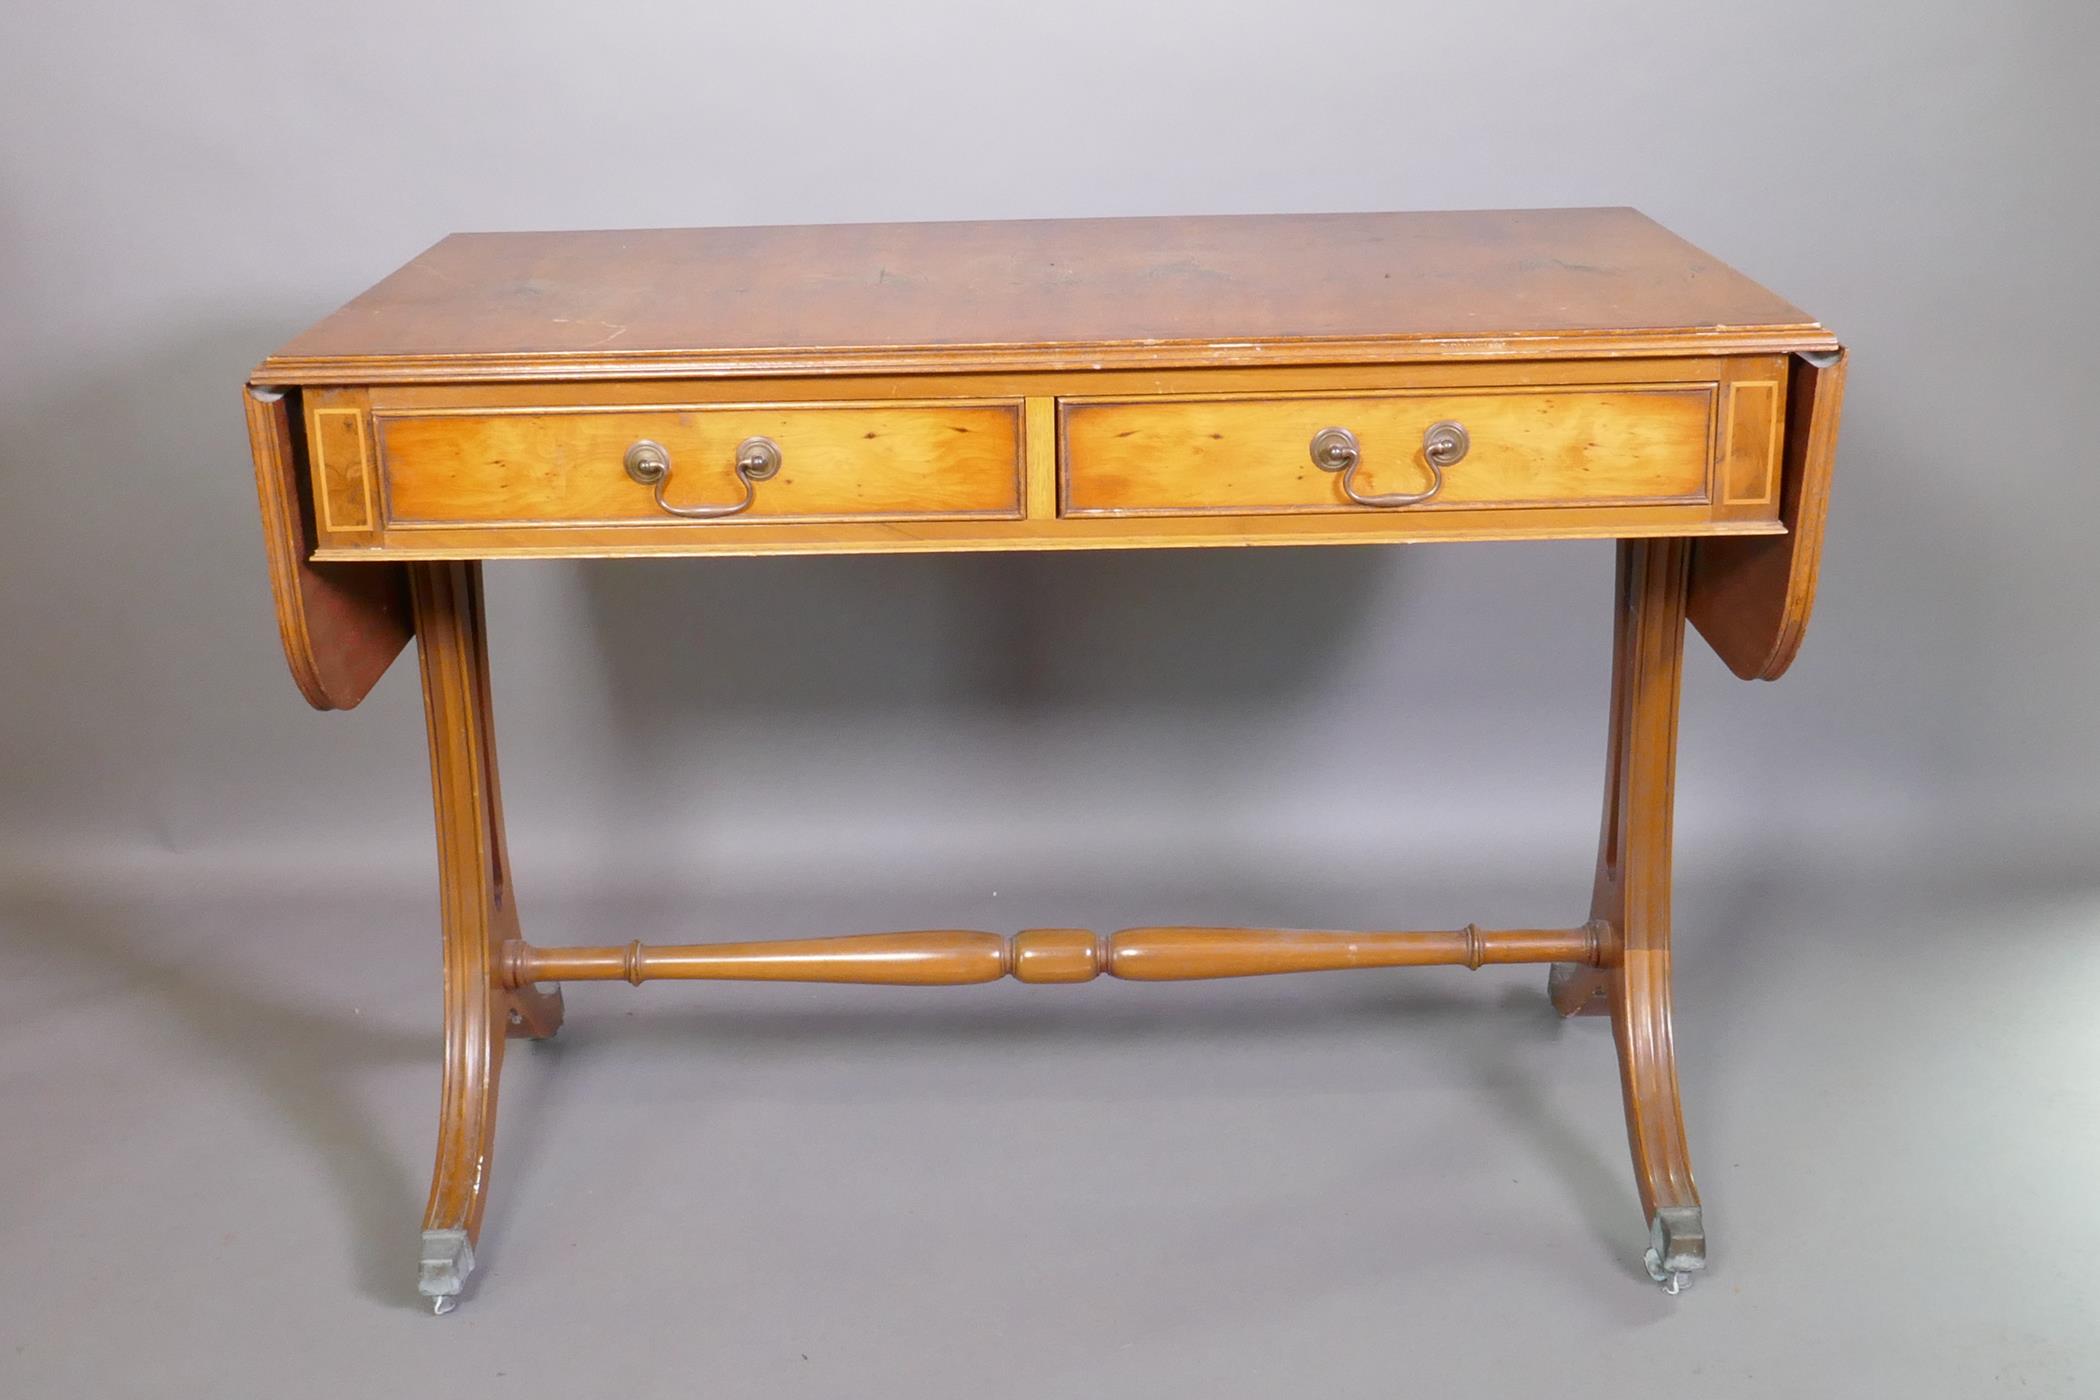 A Regency style yew wood veneered sofa table with two drawers, raised on pierced shaped ends with - Image 2 of 3